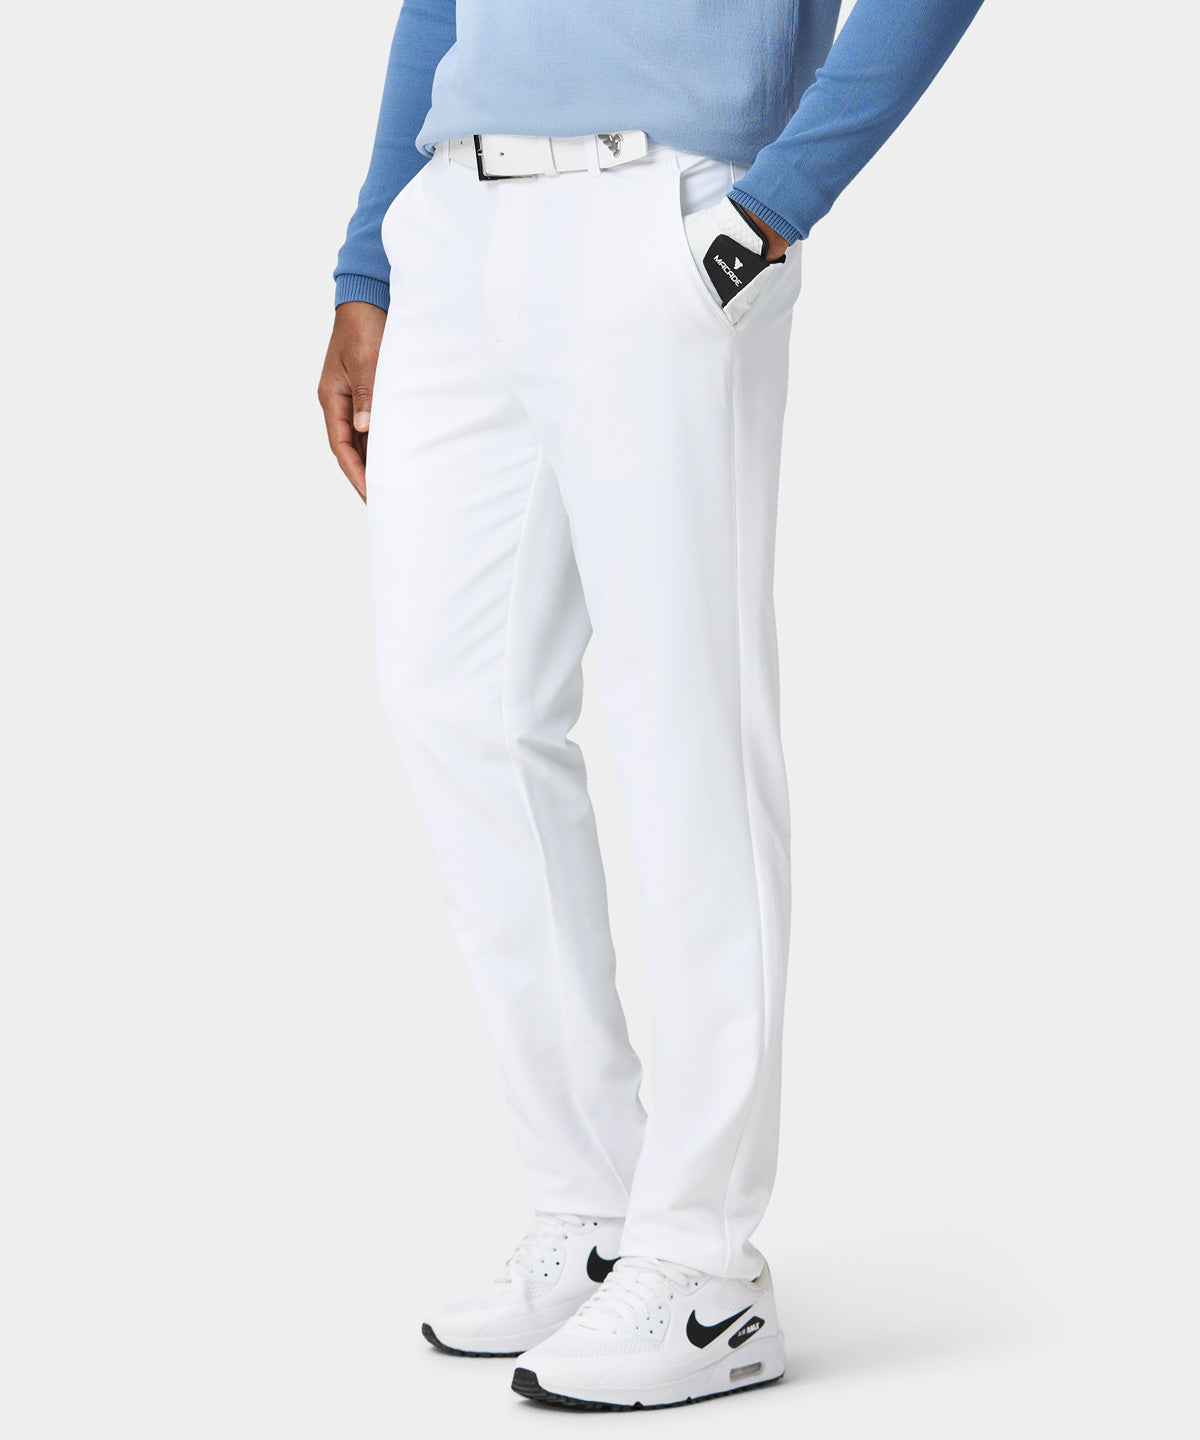 Charcoal Tech Golf Pants With FREE Delivery - From the linksland of  Scotland by Royal & Awesome